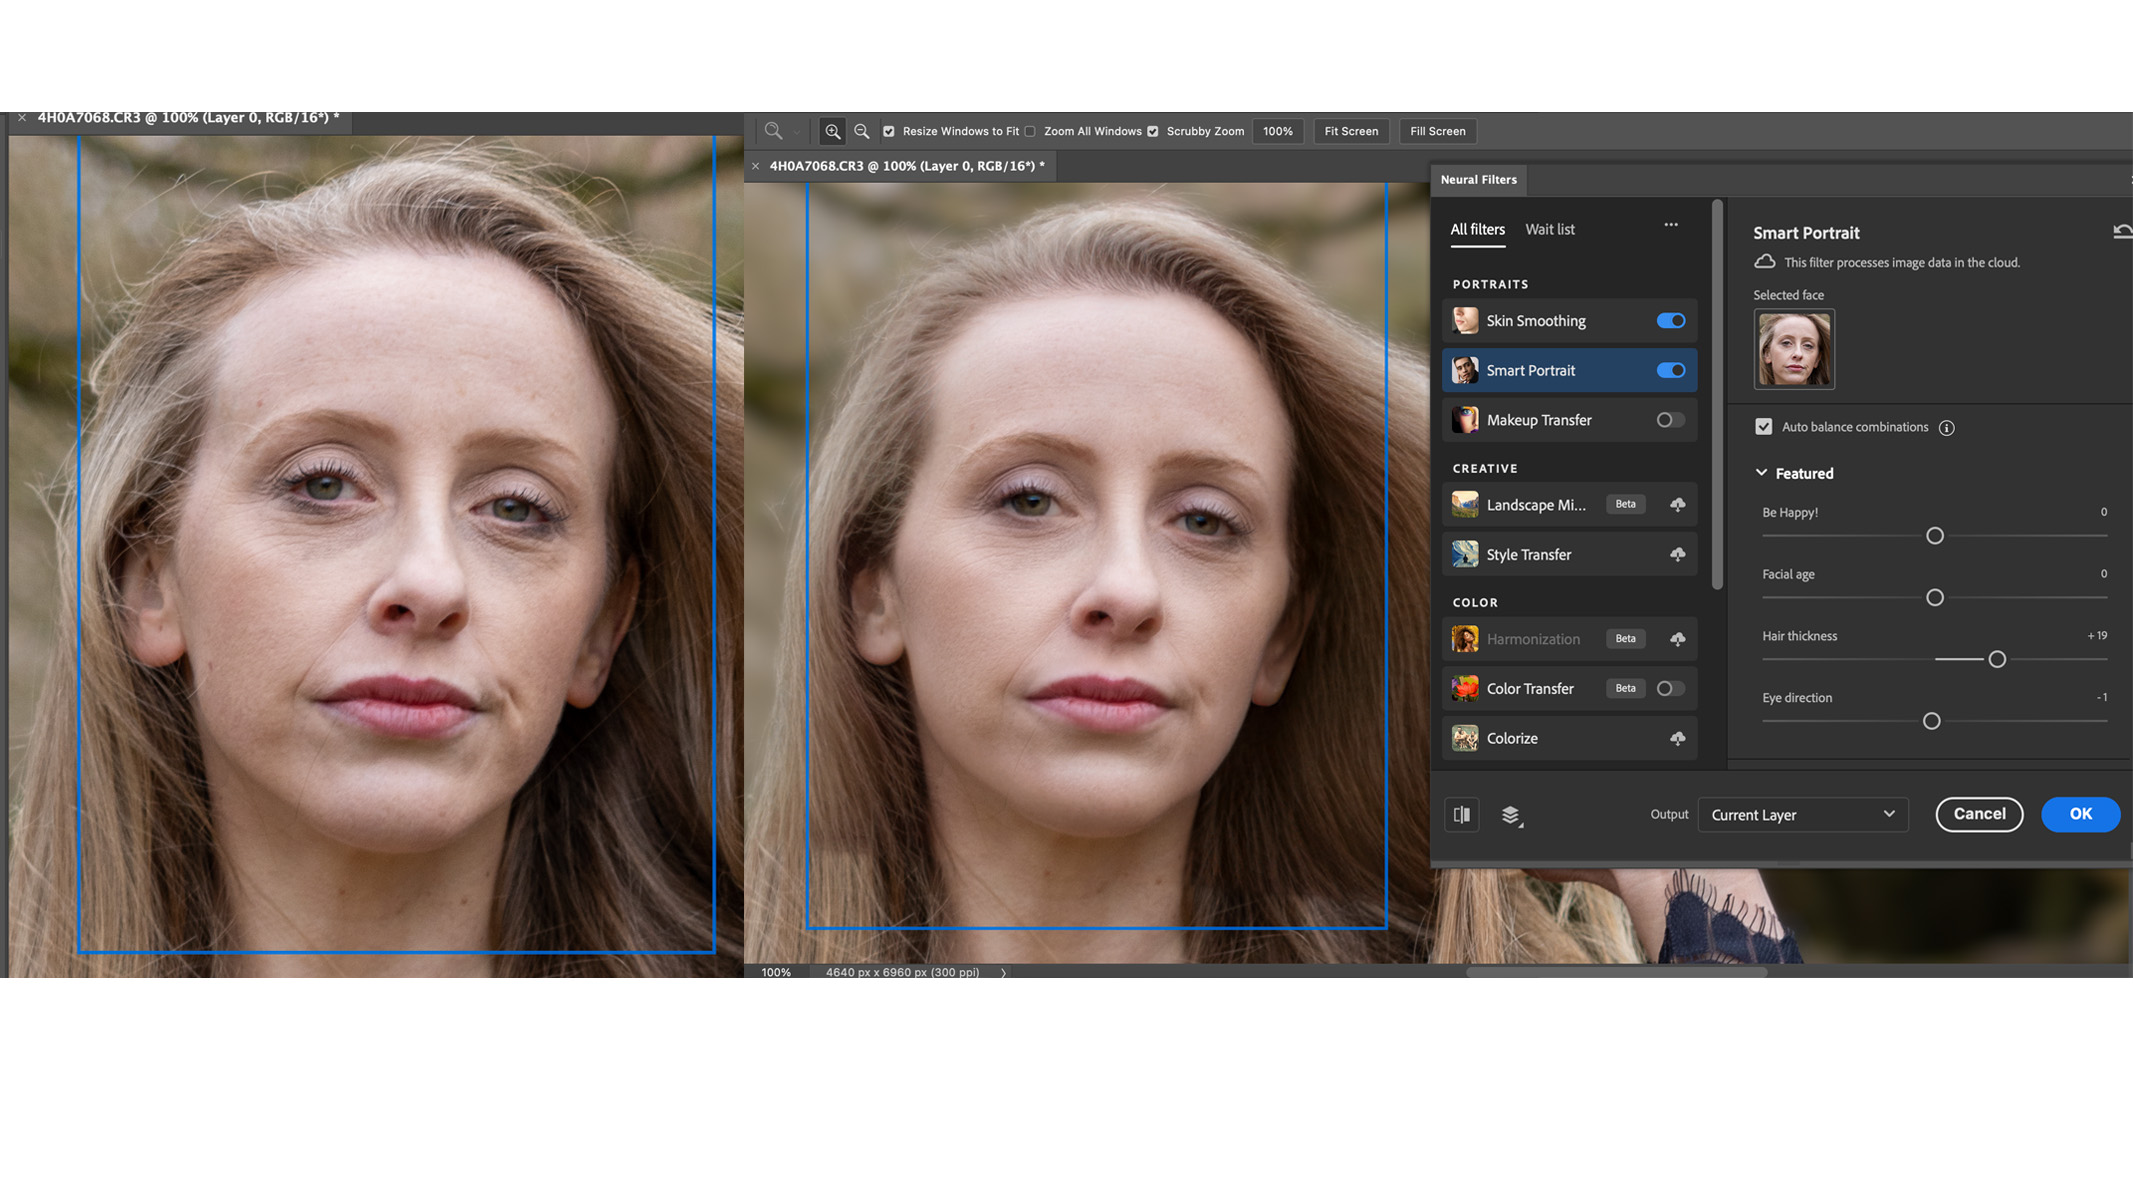 Portrait image being edited with neural filters in adobe photoshop